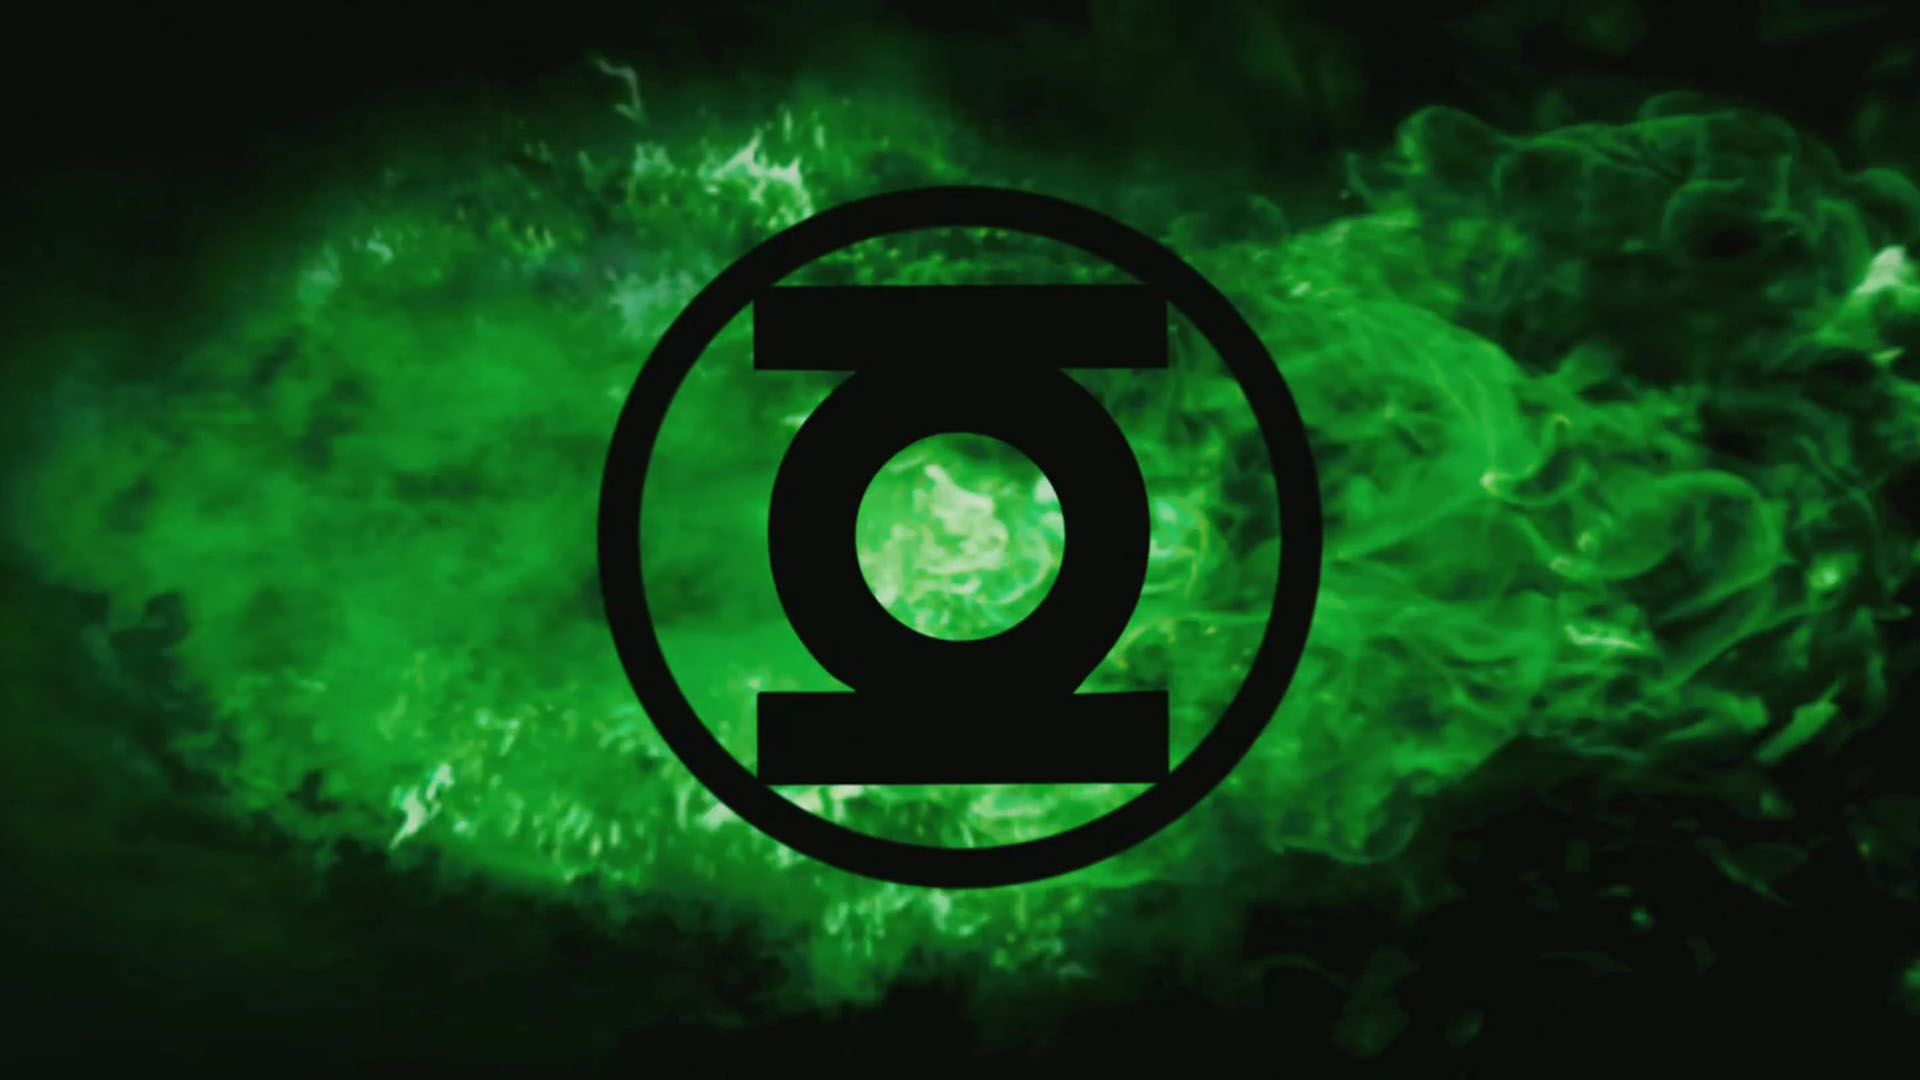 Green Lantern logo Cool Backgrounds Wallpapers 179 - HD Wallpapers ...